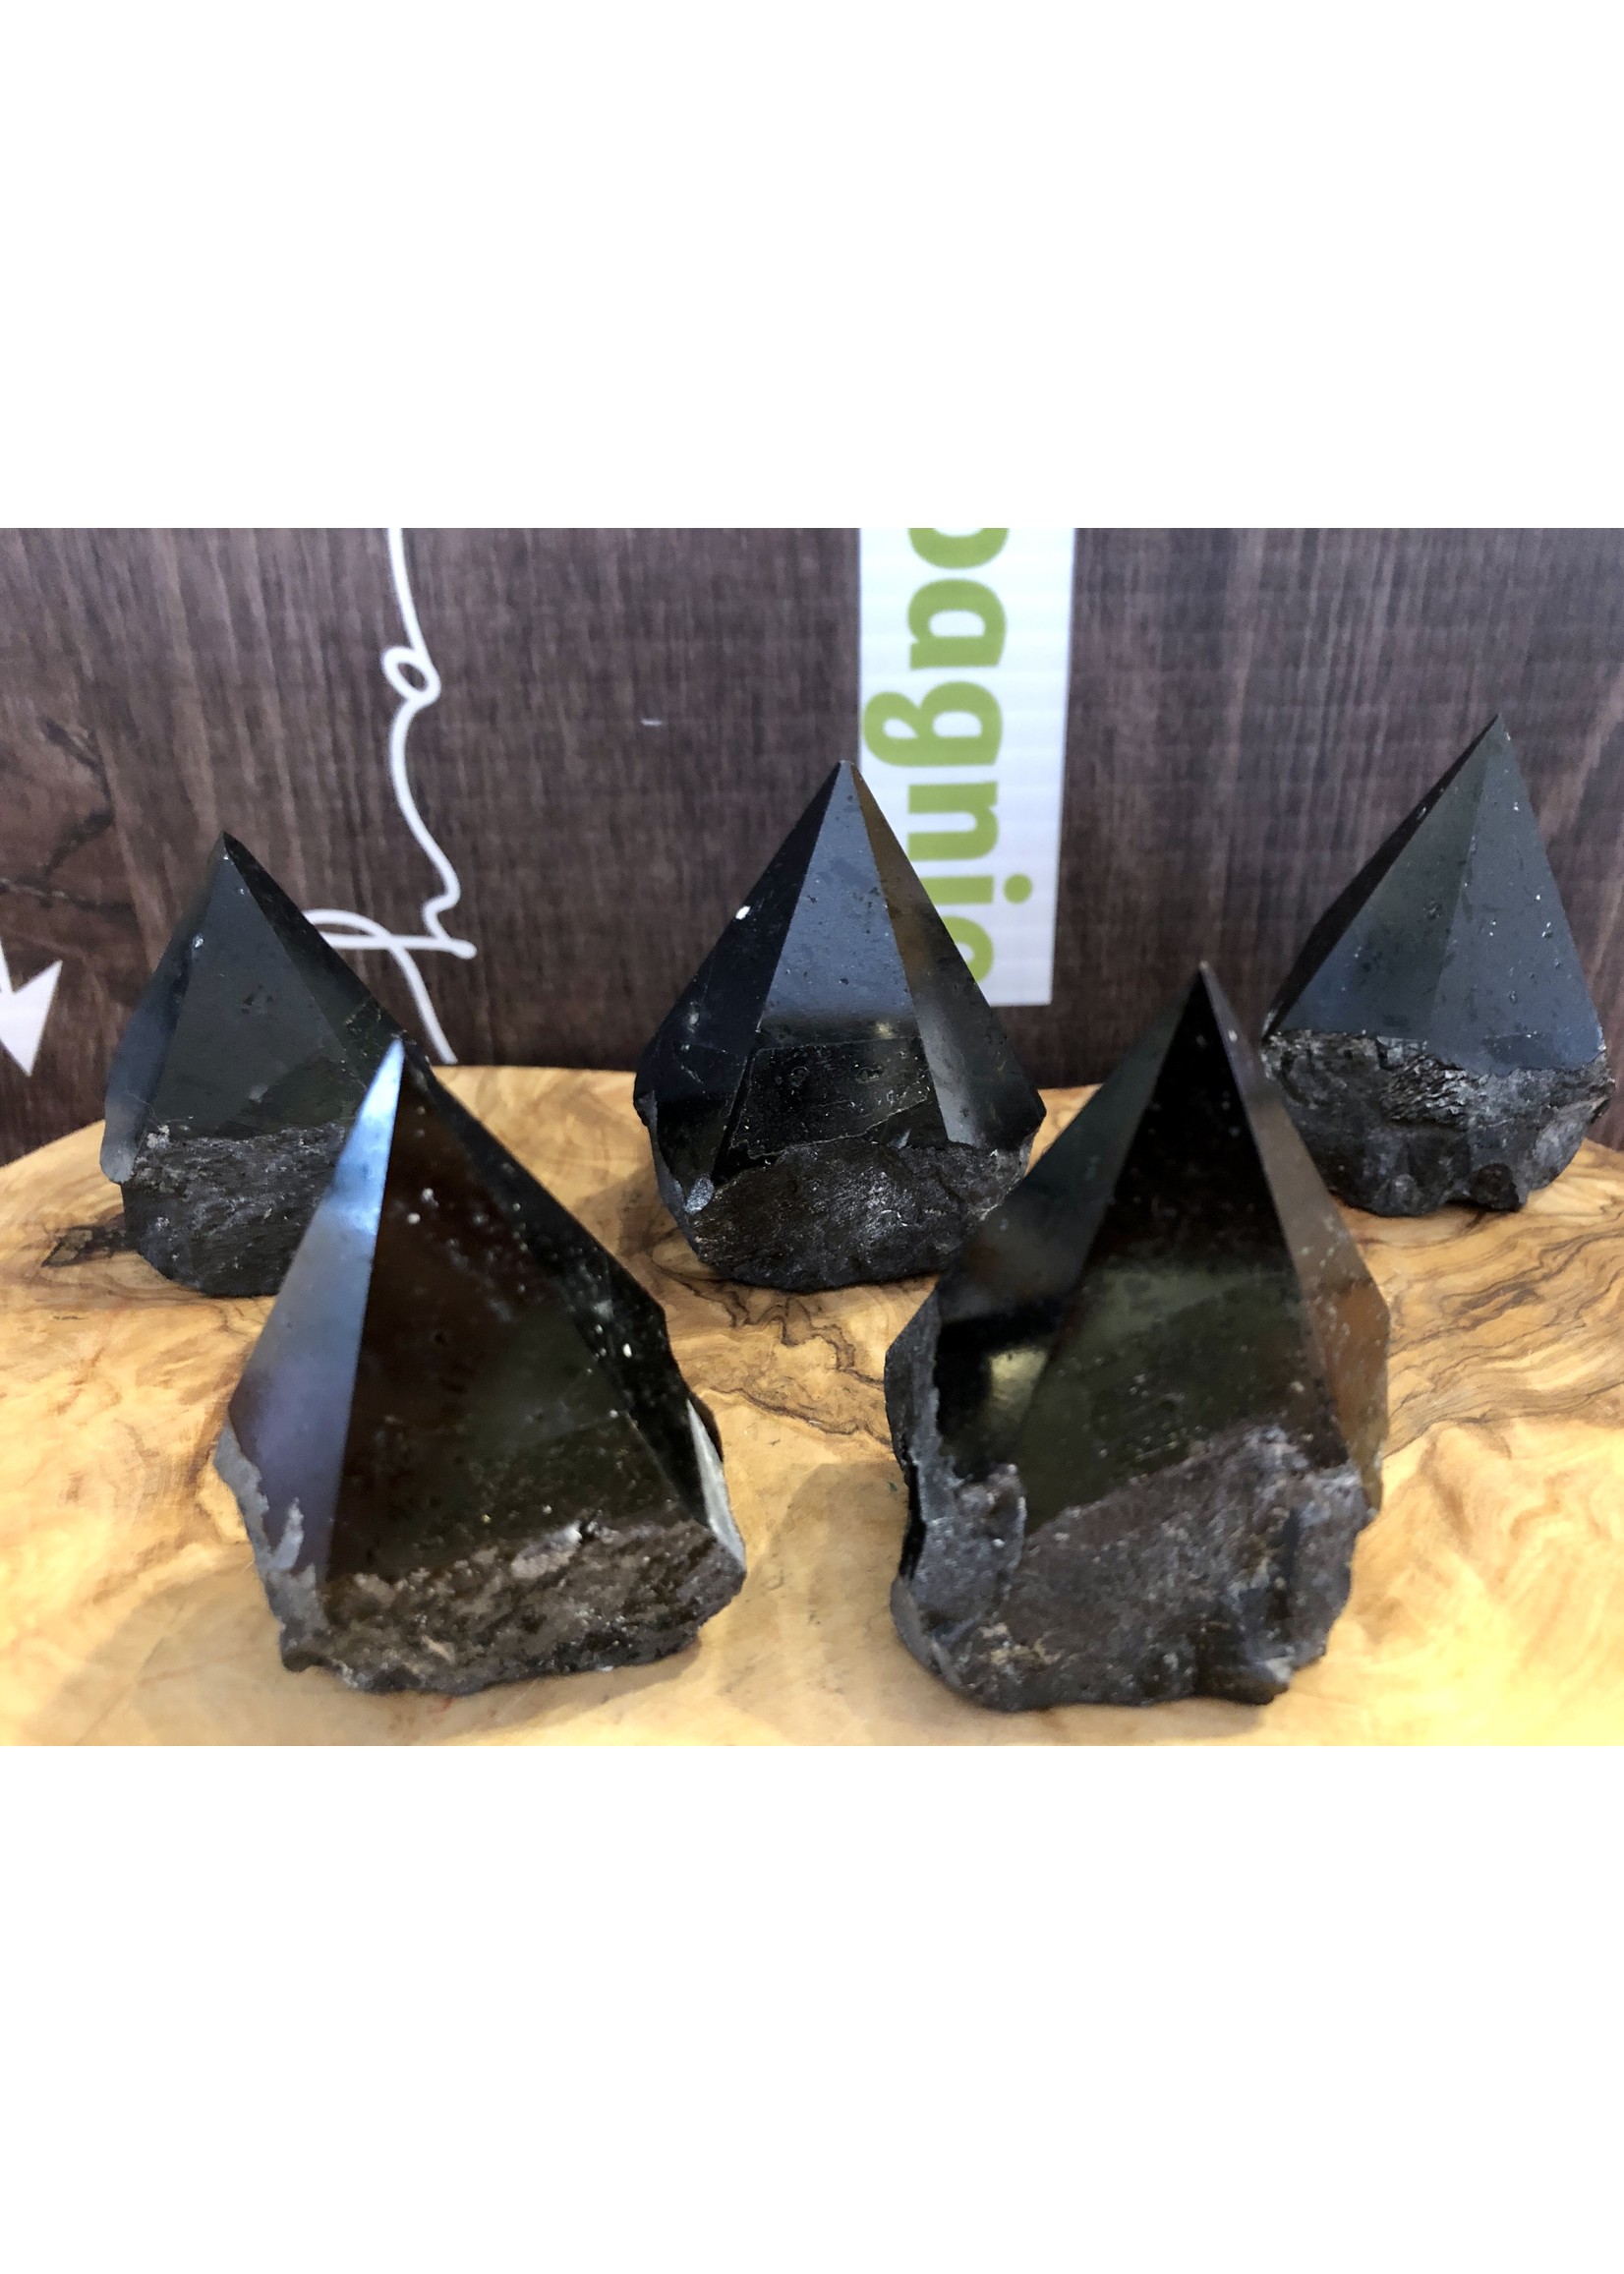 natural black tourmaline top polished, will be mainly used on the root chakra or in contact with the soles of the feet